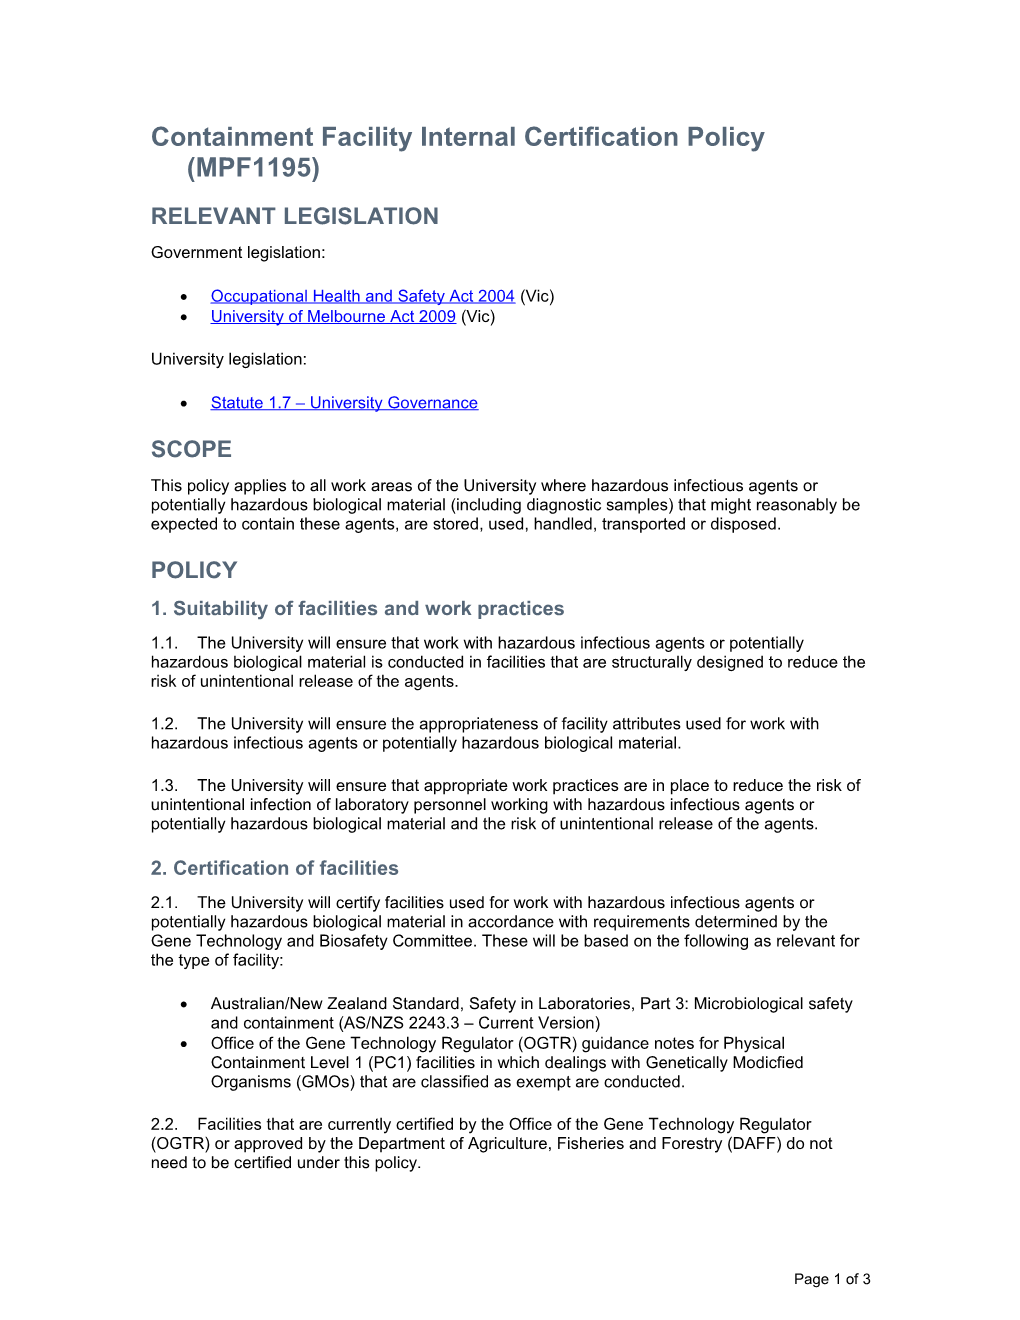 Containment Facility Internal Certification Policy (MPF1195)